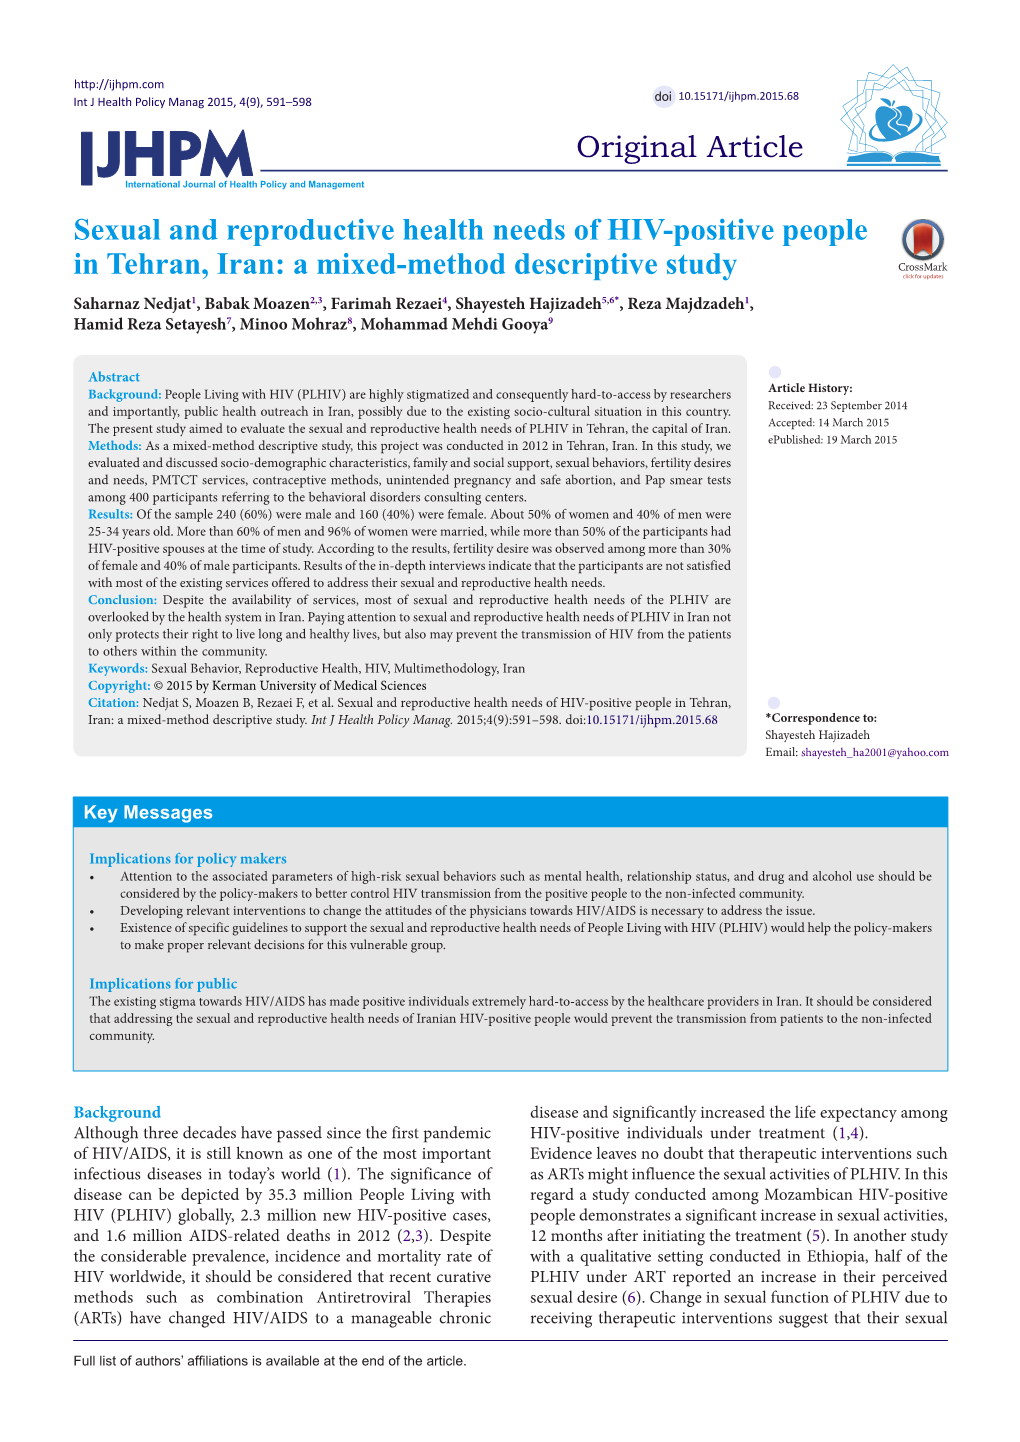 Sexual and Reproductive Health Needs of HIV-Positive People in Tehran, Iran